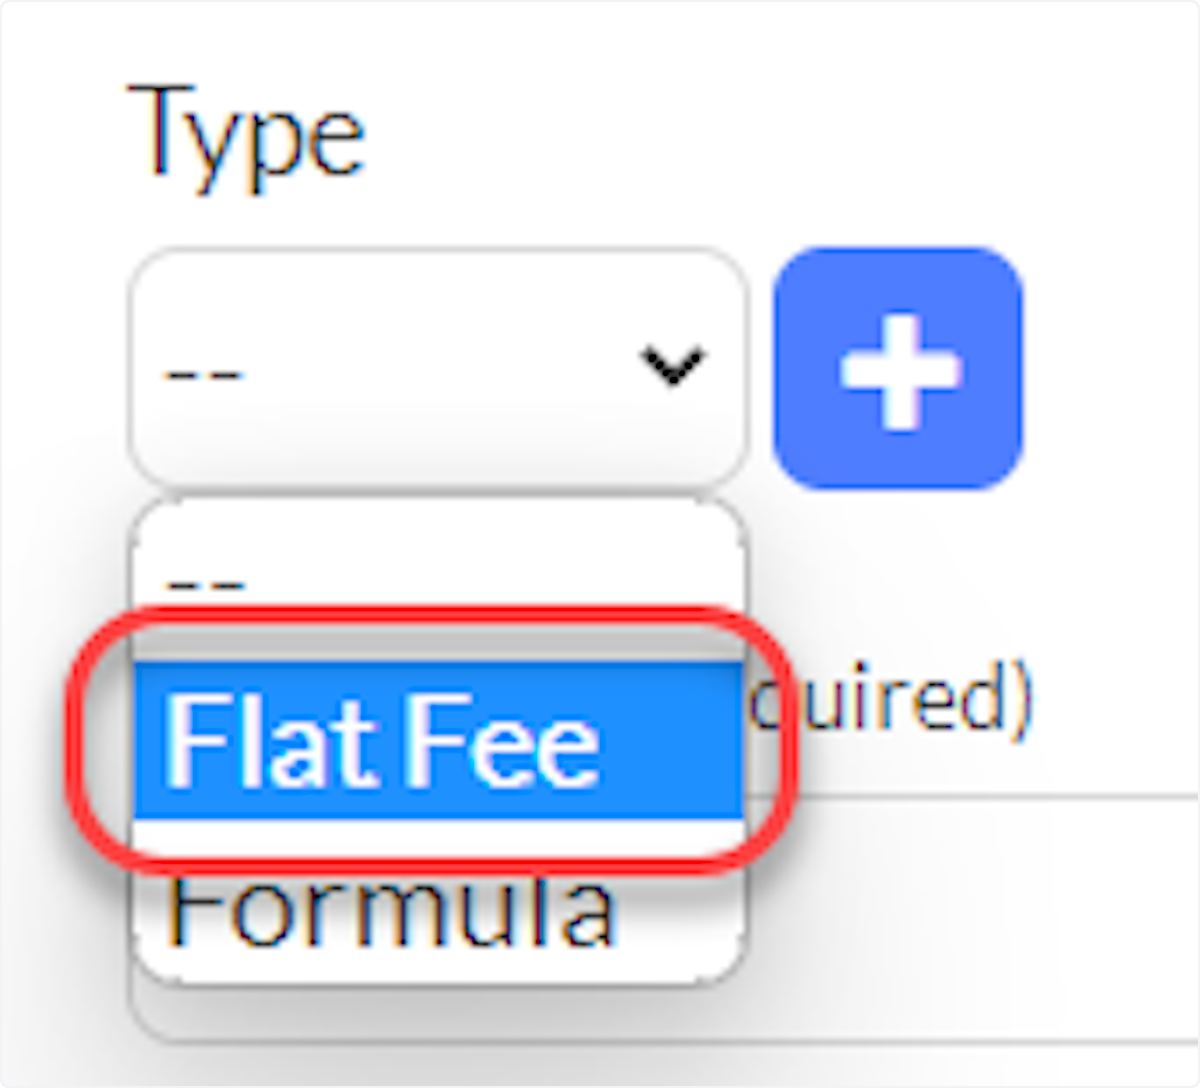 Select Flat for Fee Type.